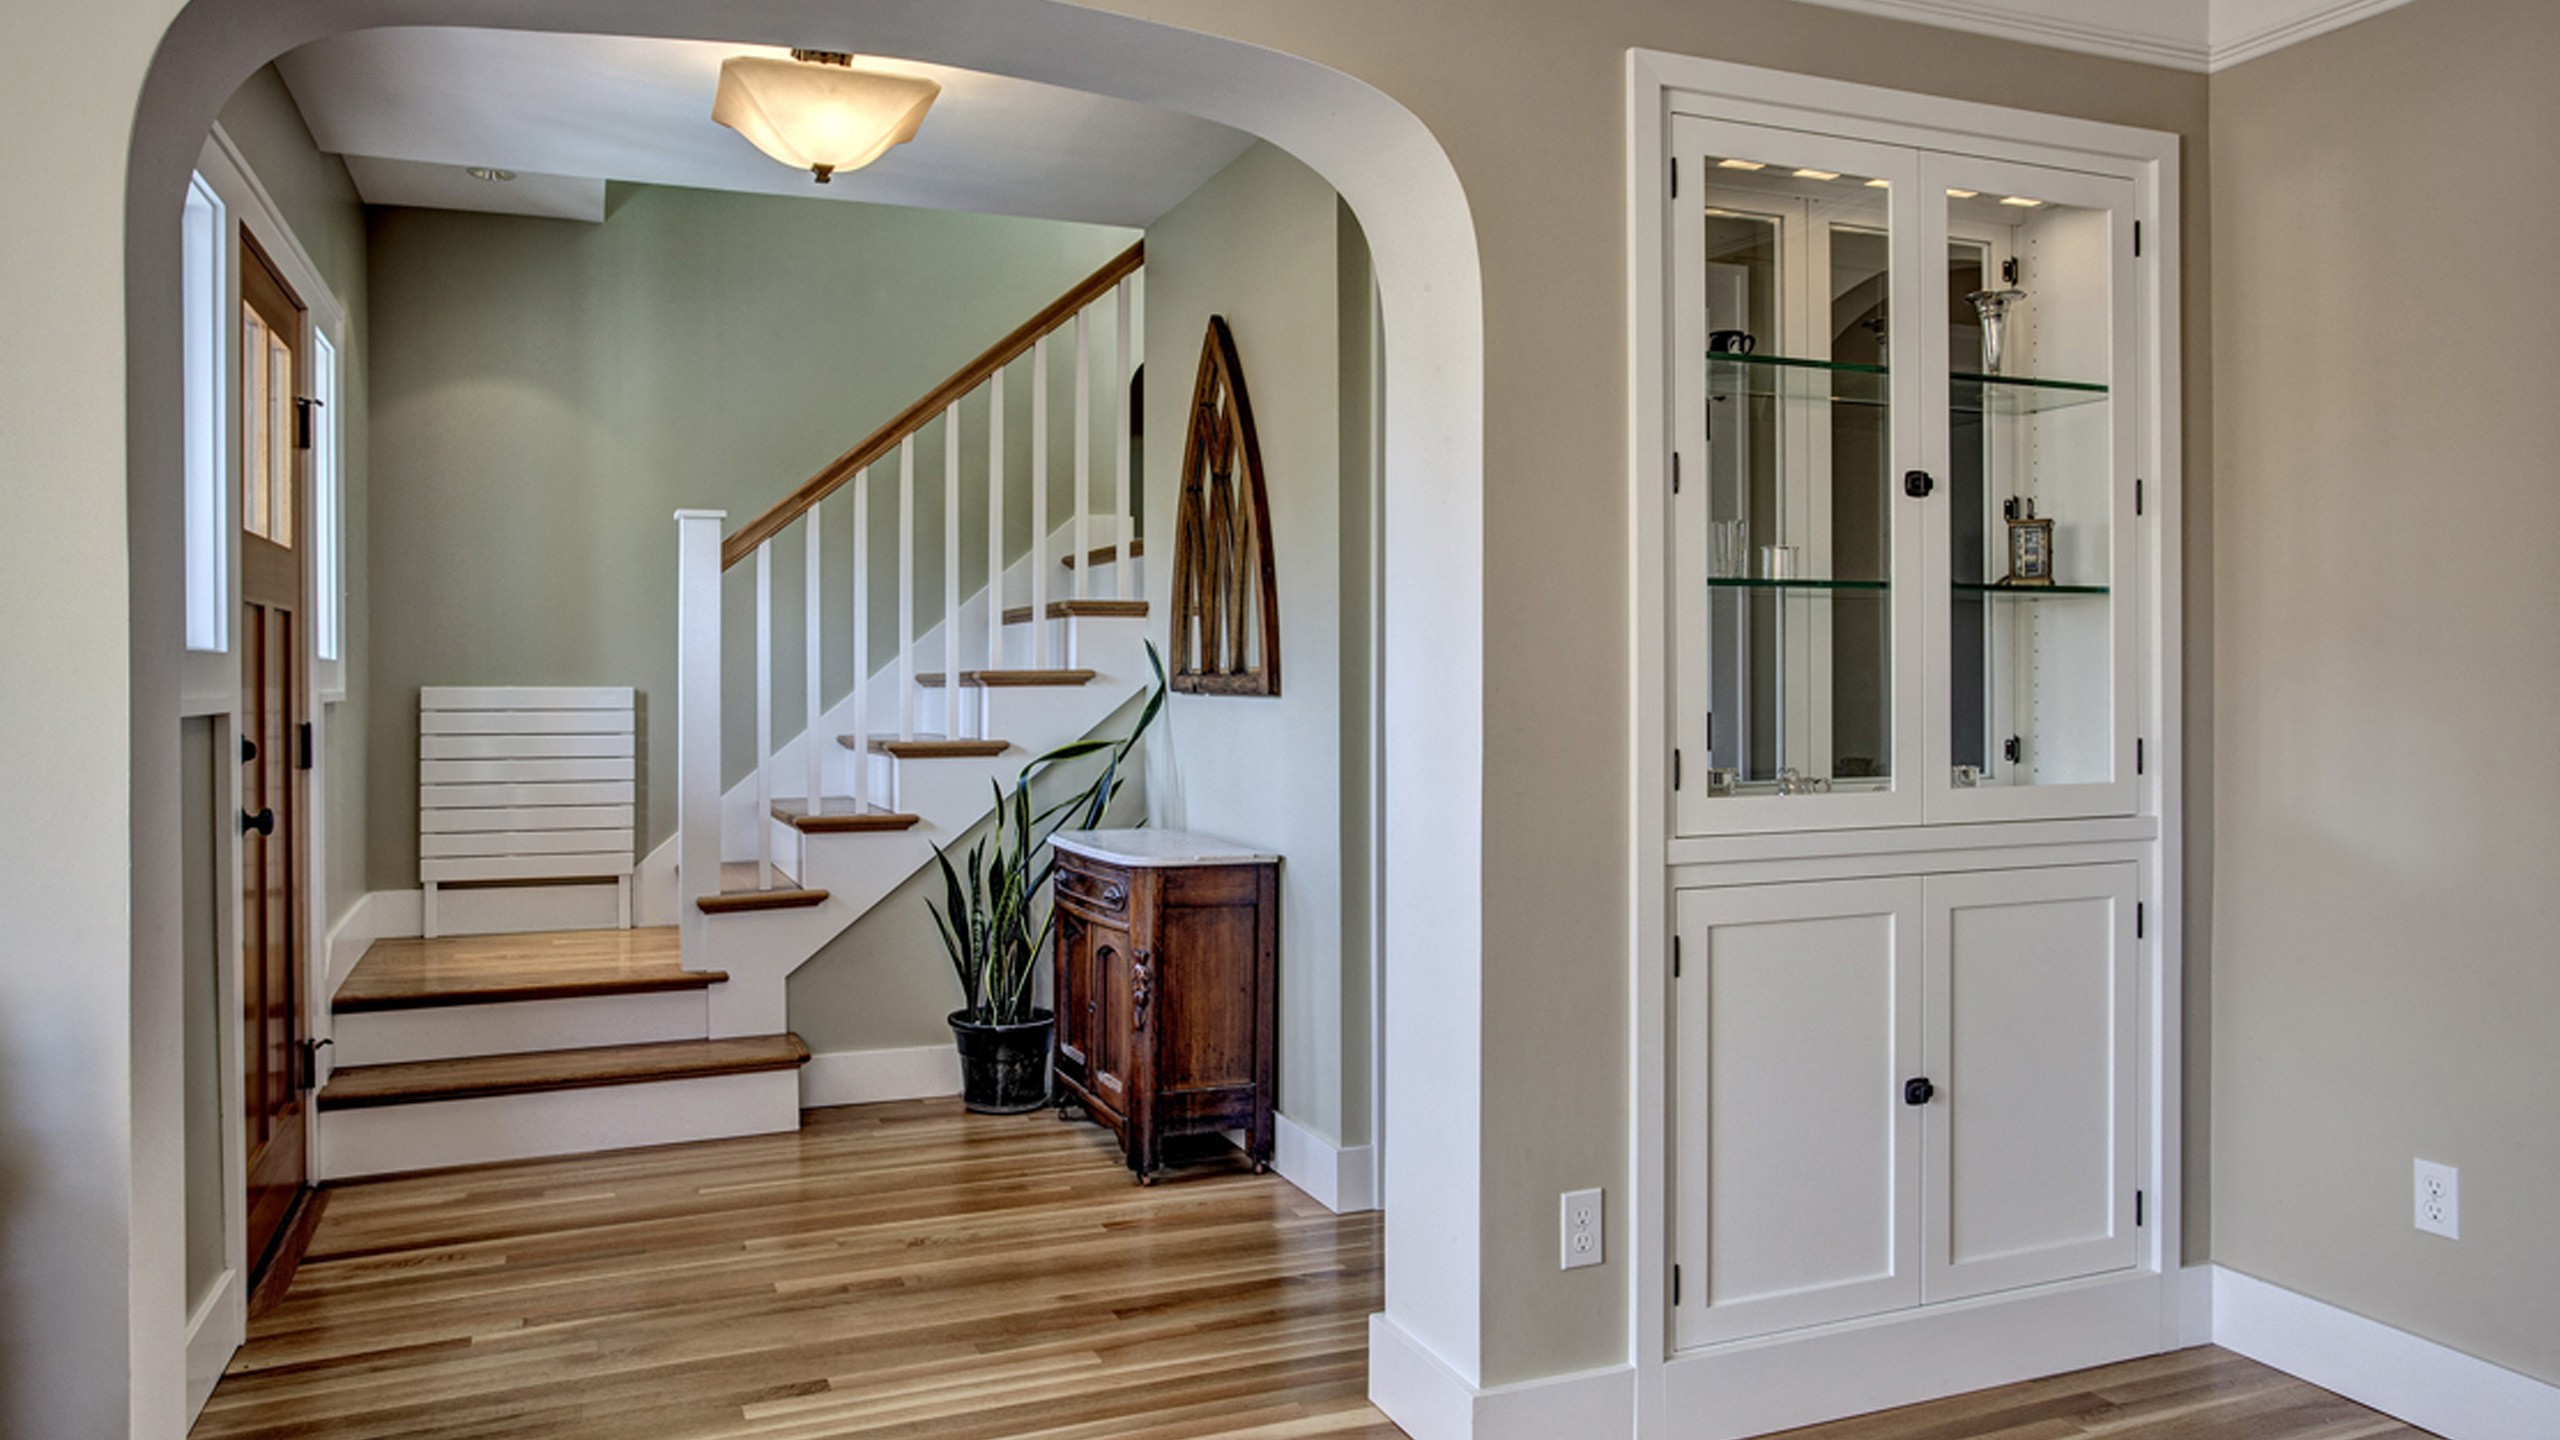 Designing A New Staircase (Everything you should ask yourself